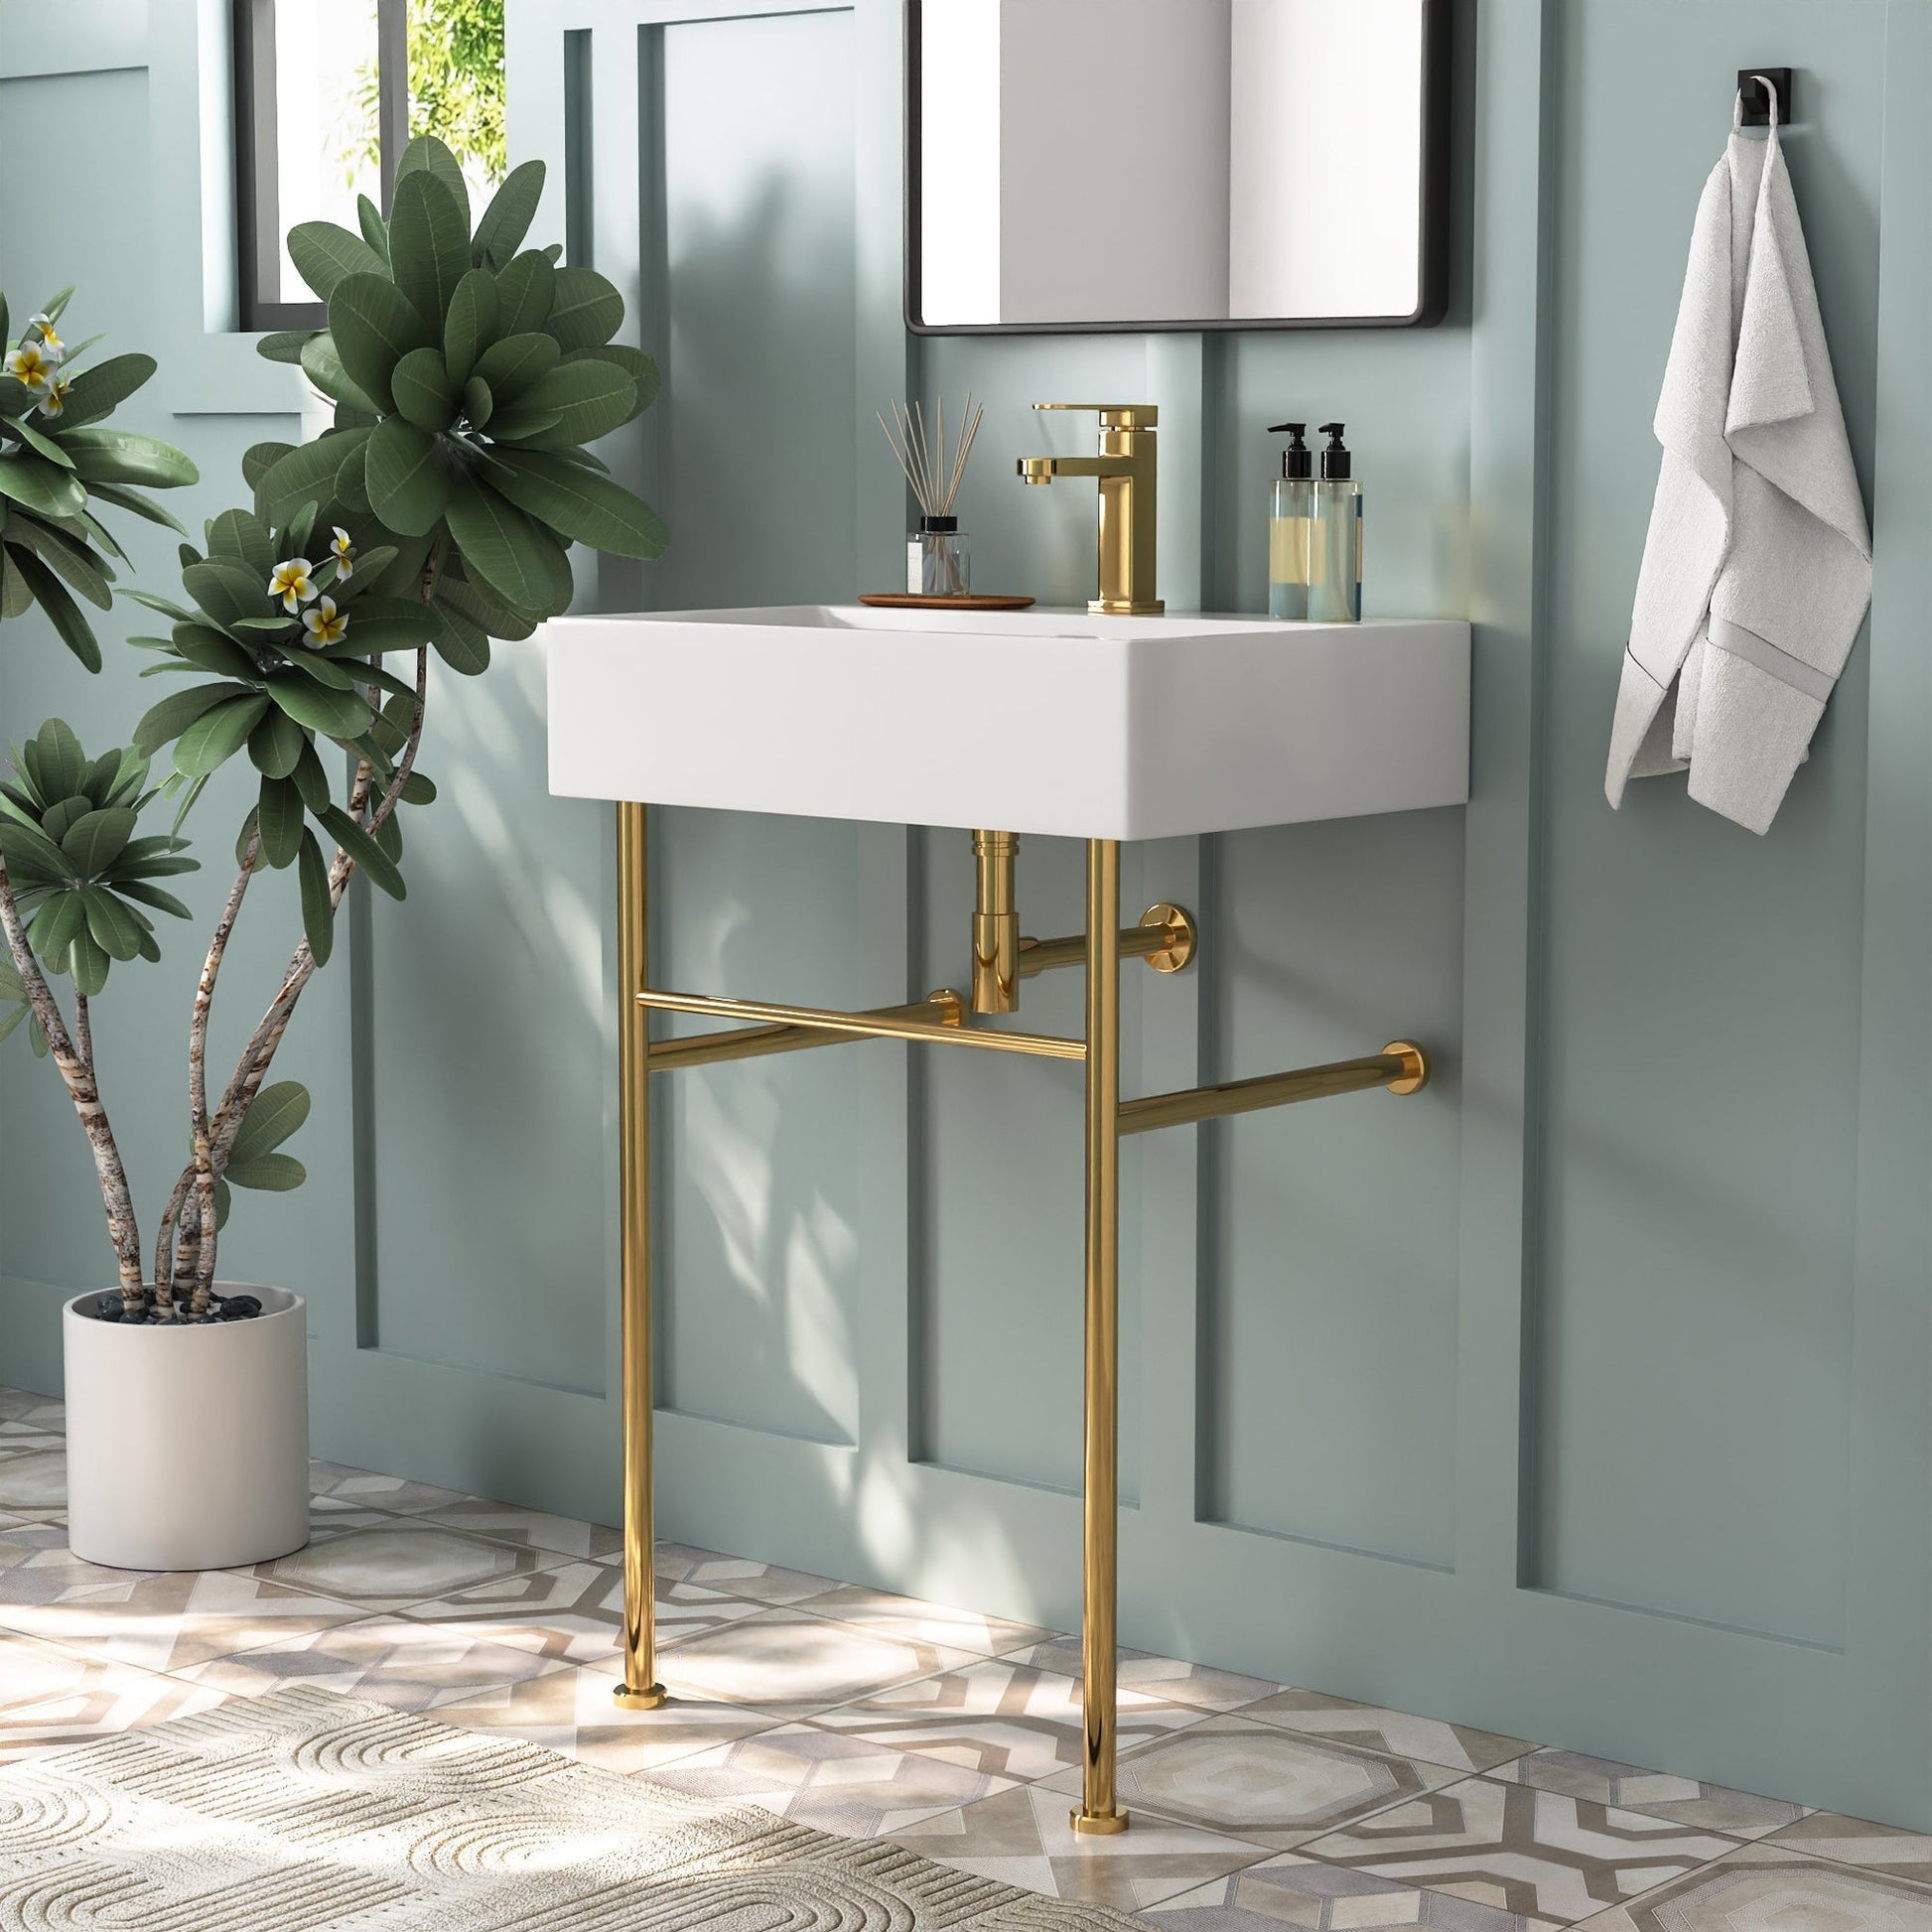 DeerValley 24" Rectangular White Ceramic Console Bathroom Sink With Gold Legs and Single Faucet Hole